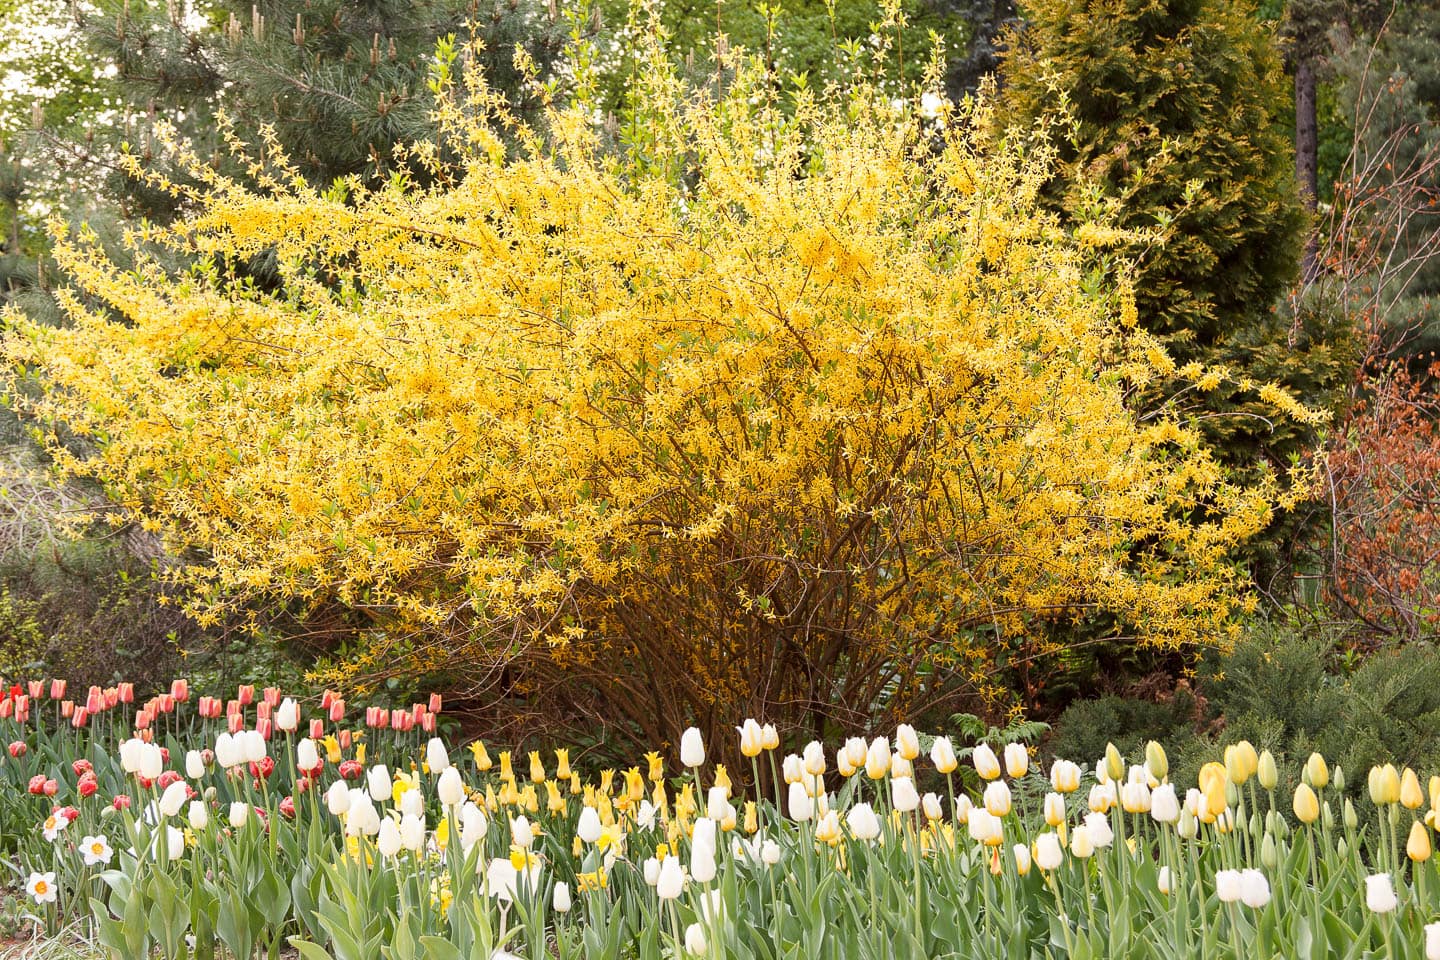 Forsythia bush in bloom beside early tulips and daffodils